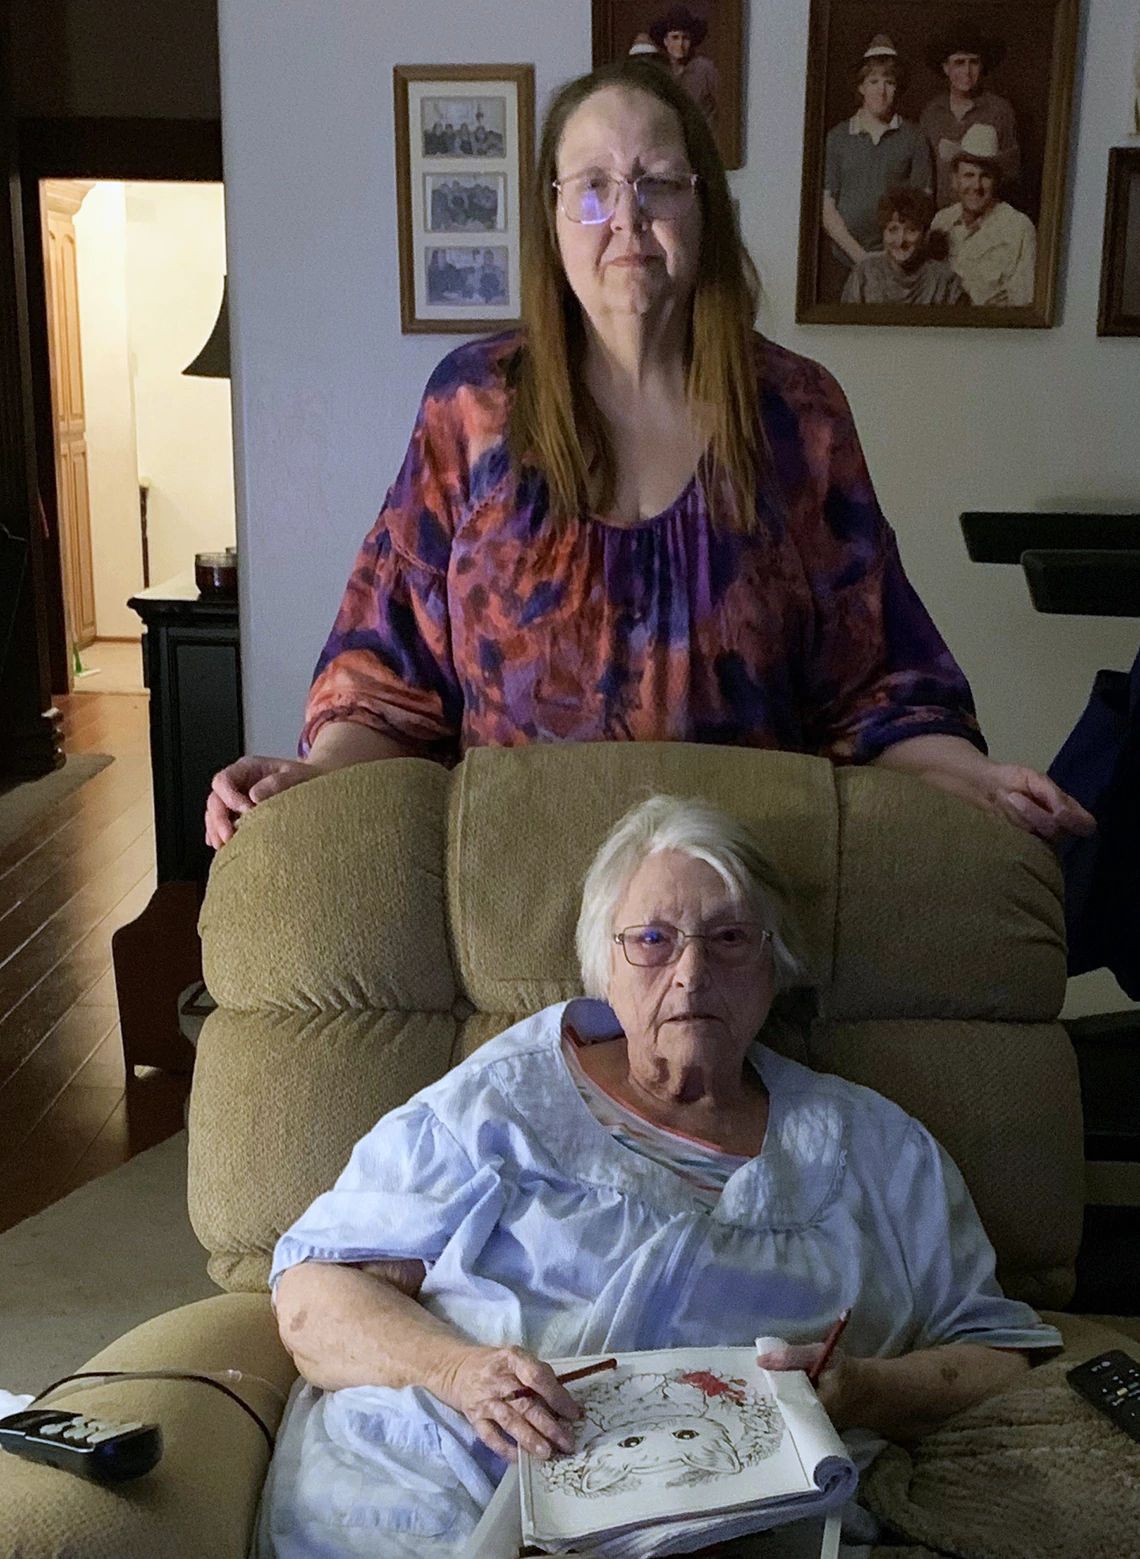 Kimberly Moser stands behind her mother-in-law, Charlene, who is seated in a recliner.